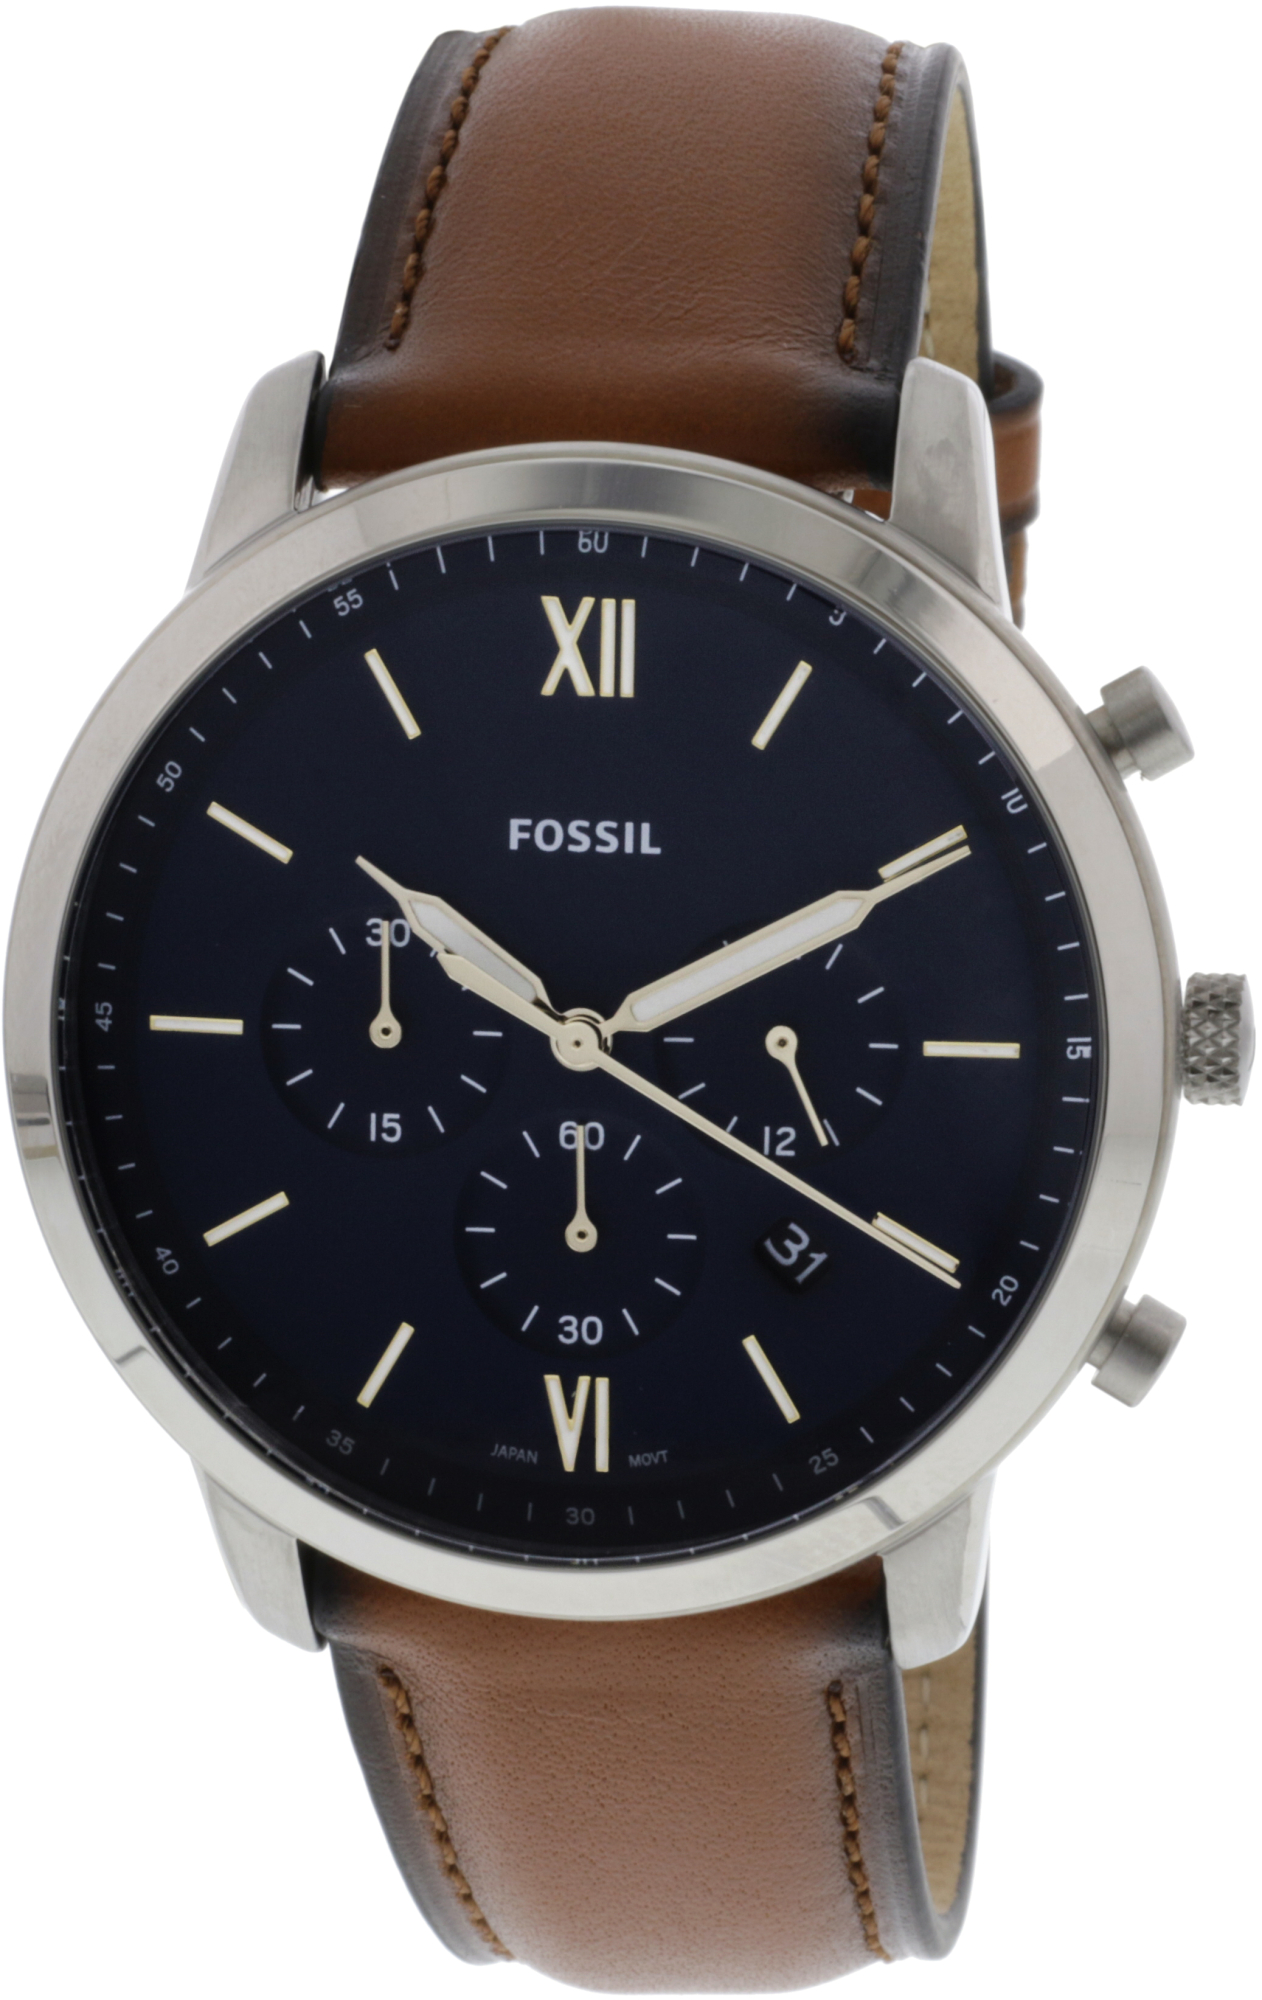 Fossil Men's Neutra FS5453 Silver Leather Japanese Chronograph Fashion Watch